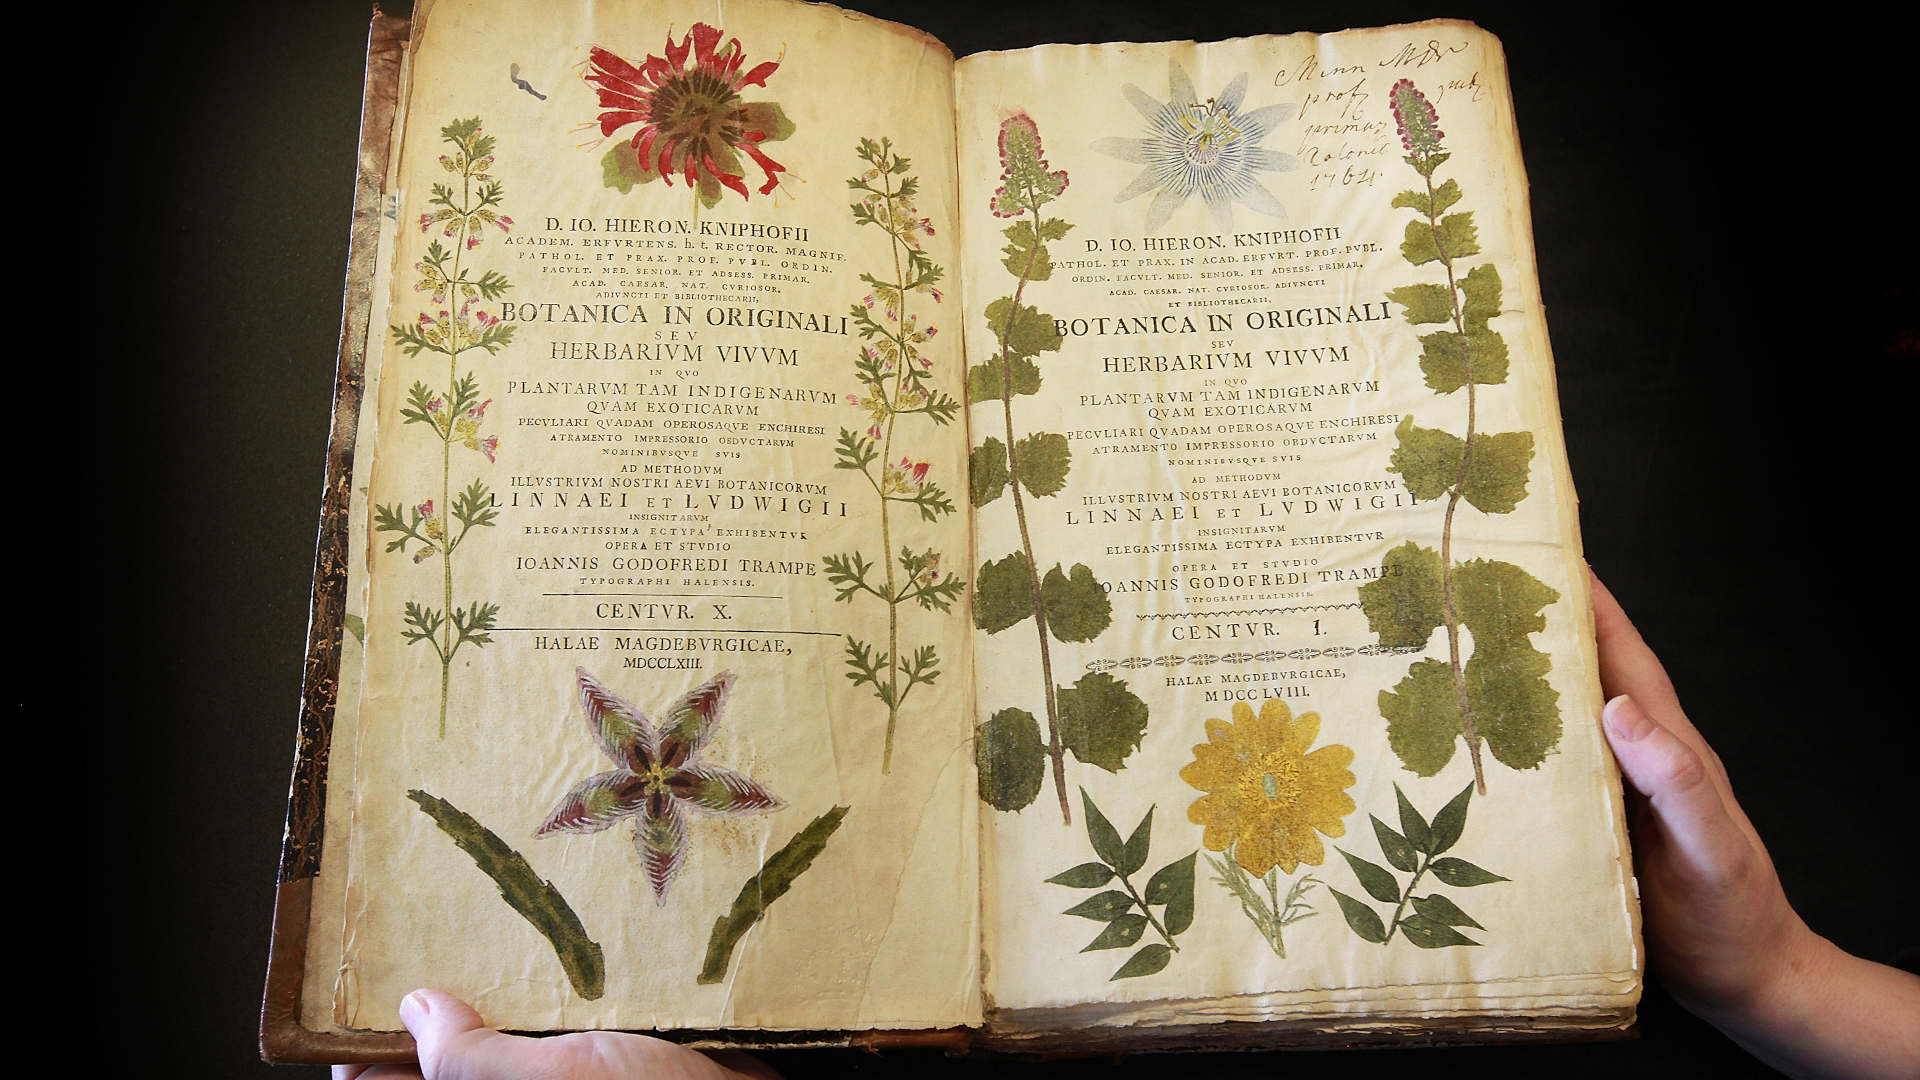 A rare 18th century book containing nature prints is displayed at the Herbaruim library at the Royal Botanic Gardens, Kew, in London.